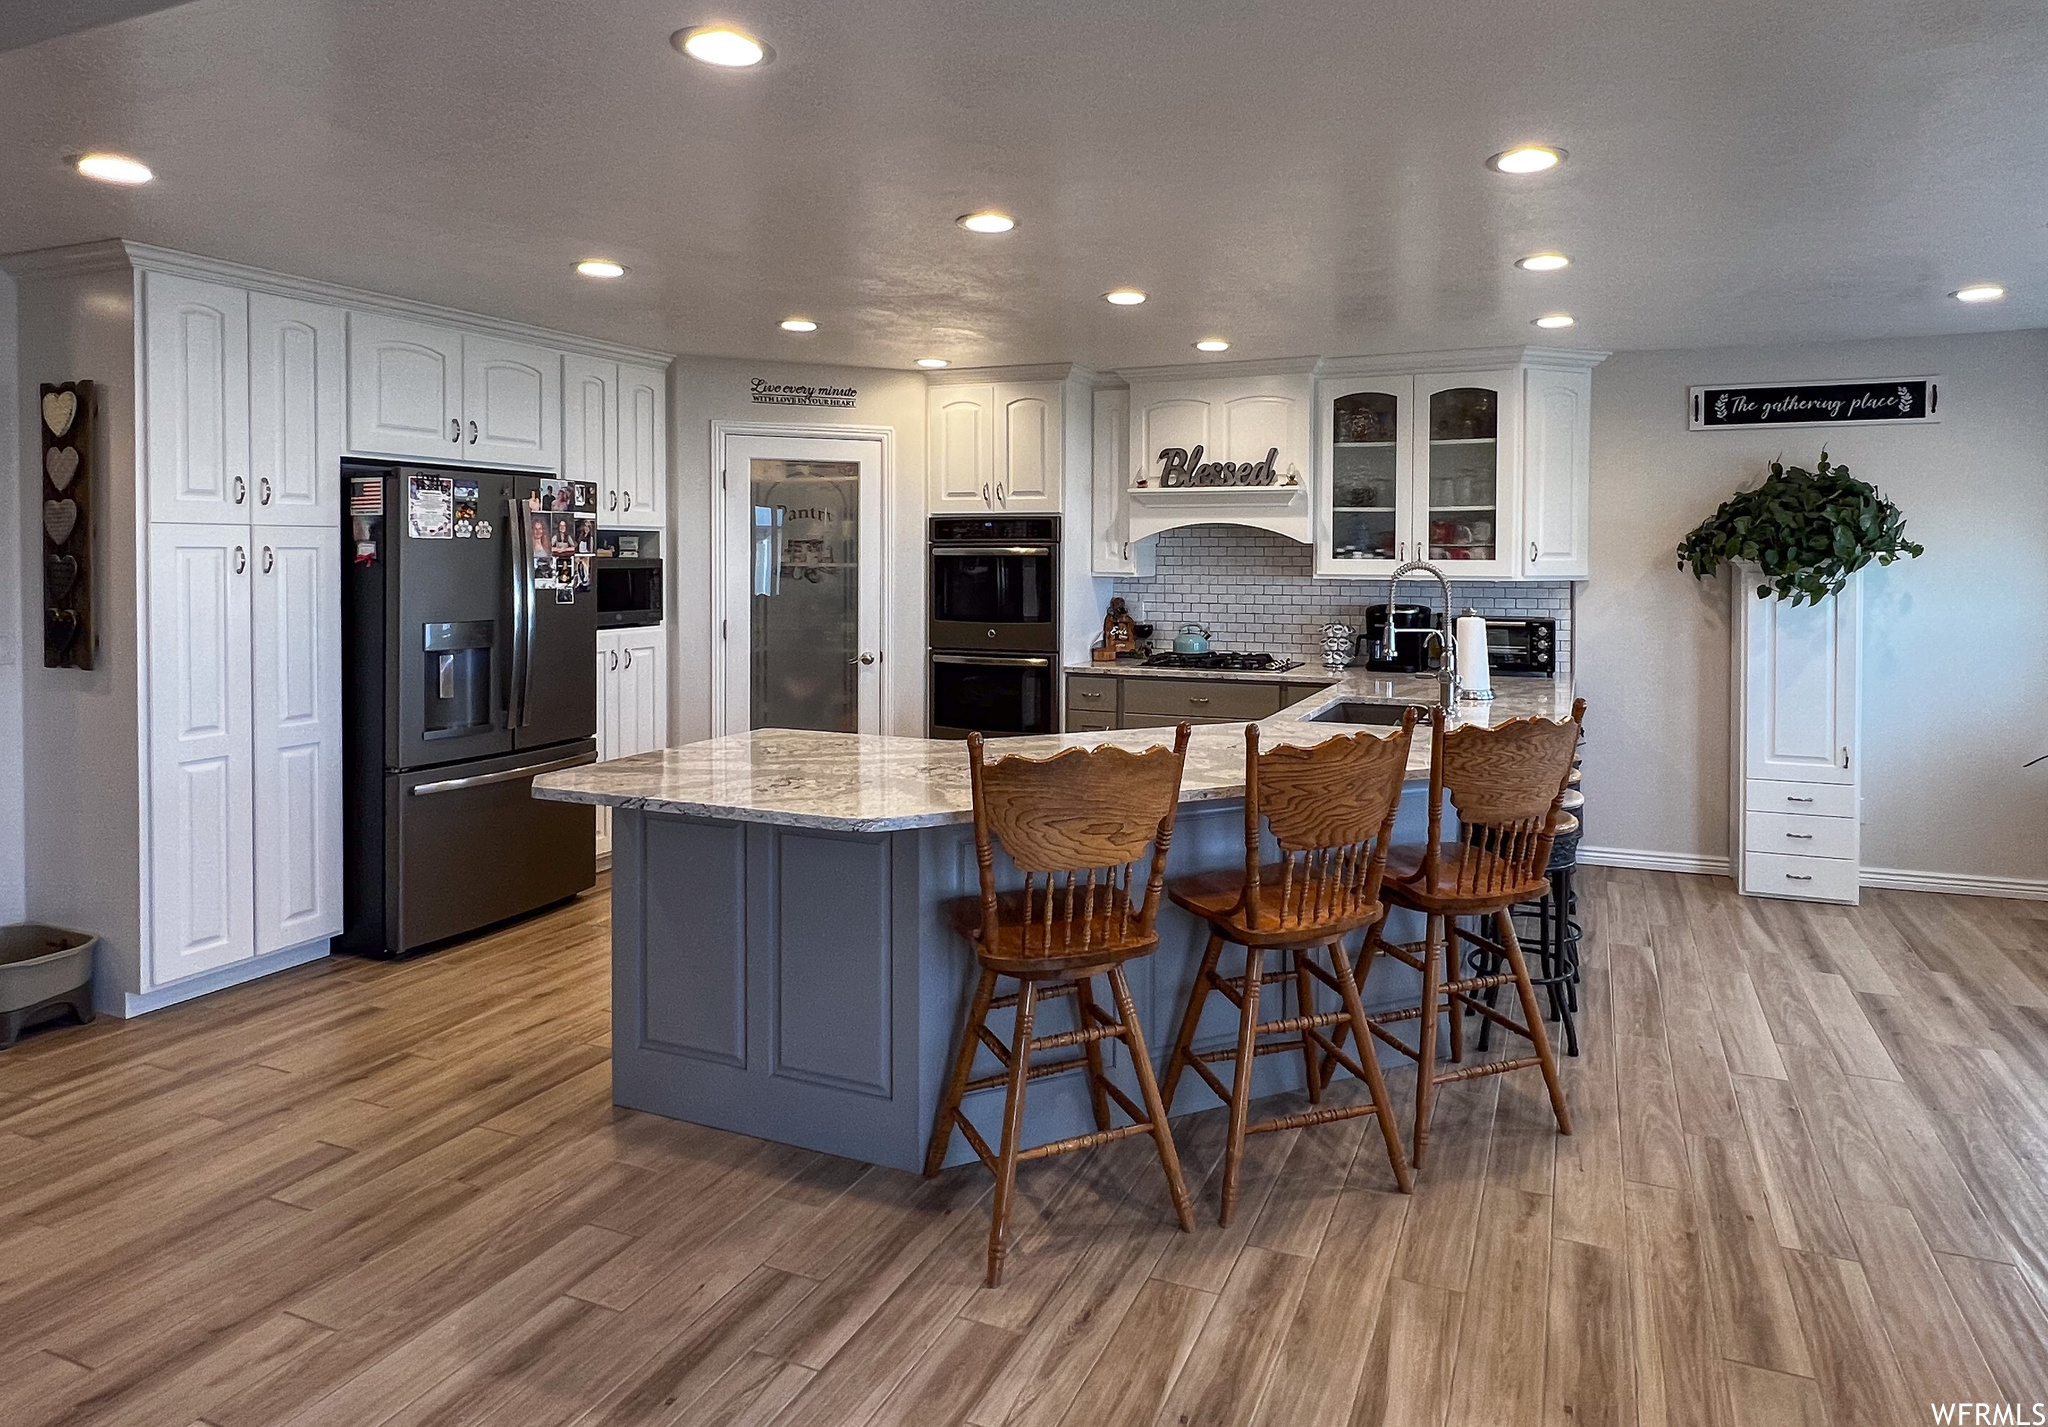 Kitchen with a breakfast bar, refrigerator, double oven, light colored flooring, light stone countertops, and white cabinets